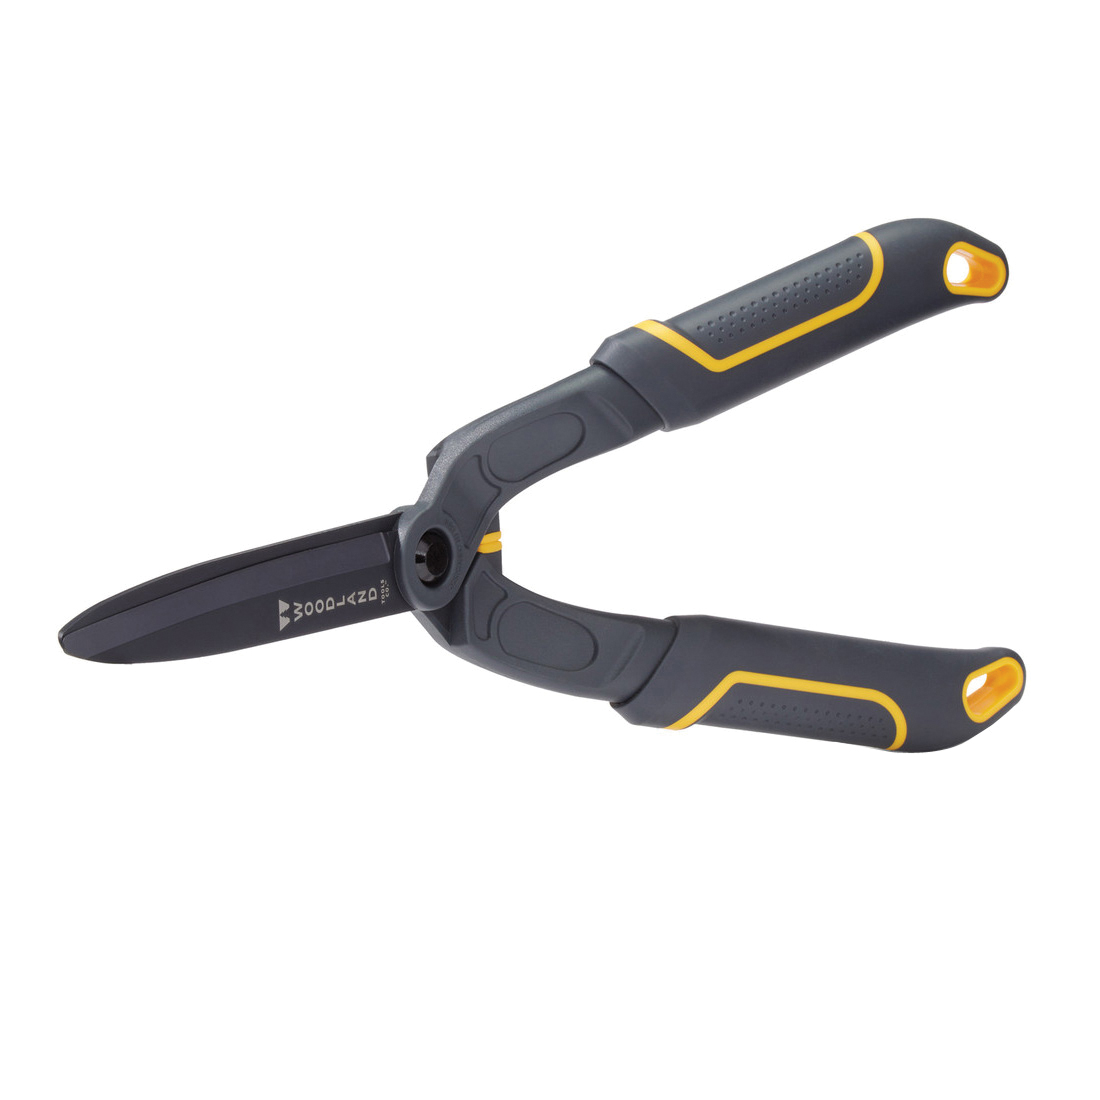 Compact Duralight 20-4004-100 Hedge Shear, Carbon Steel Blade, Cushioned Handle, 17 in OAL